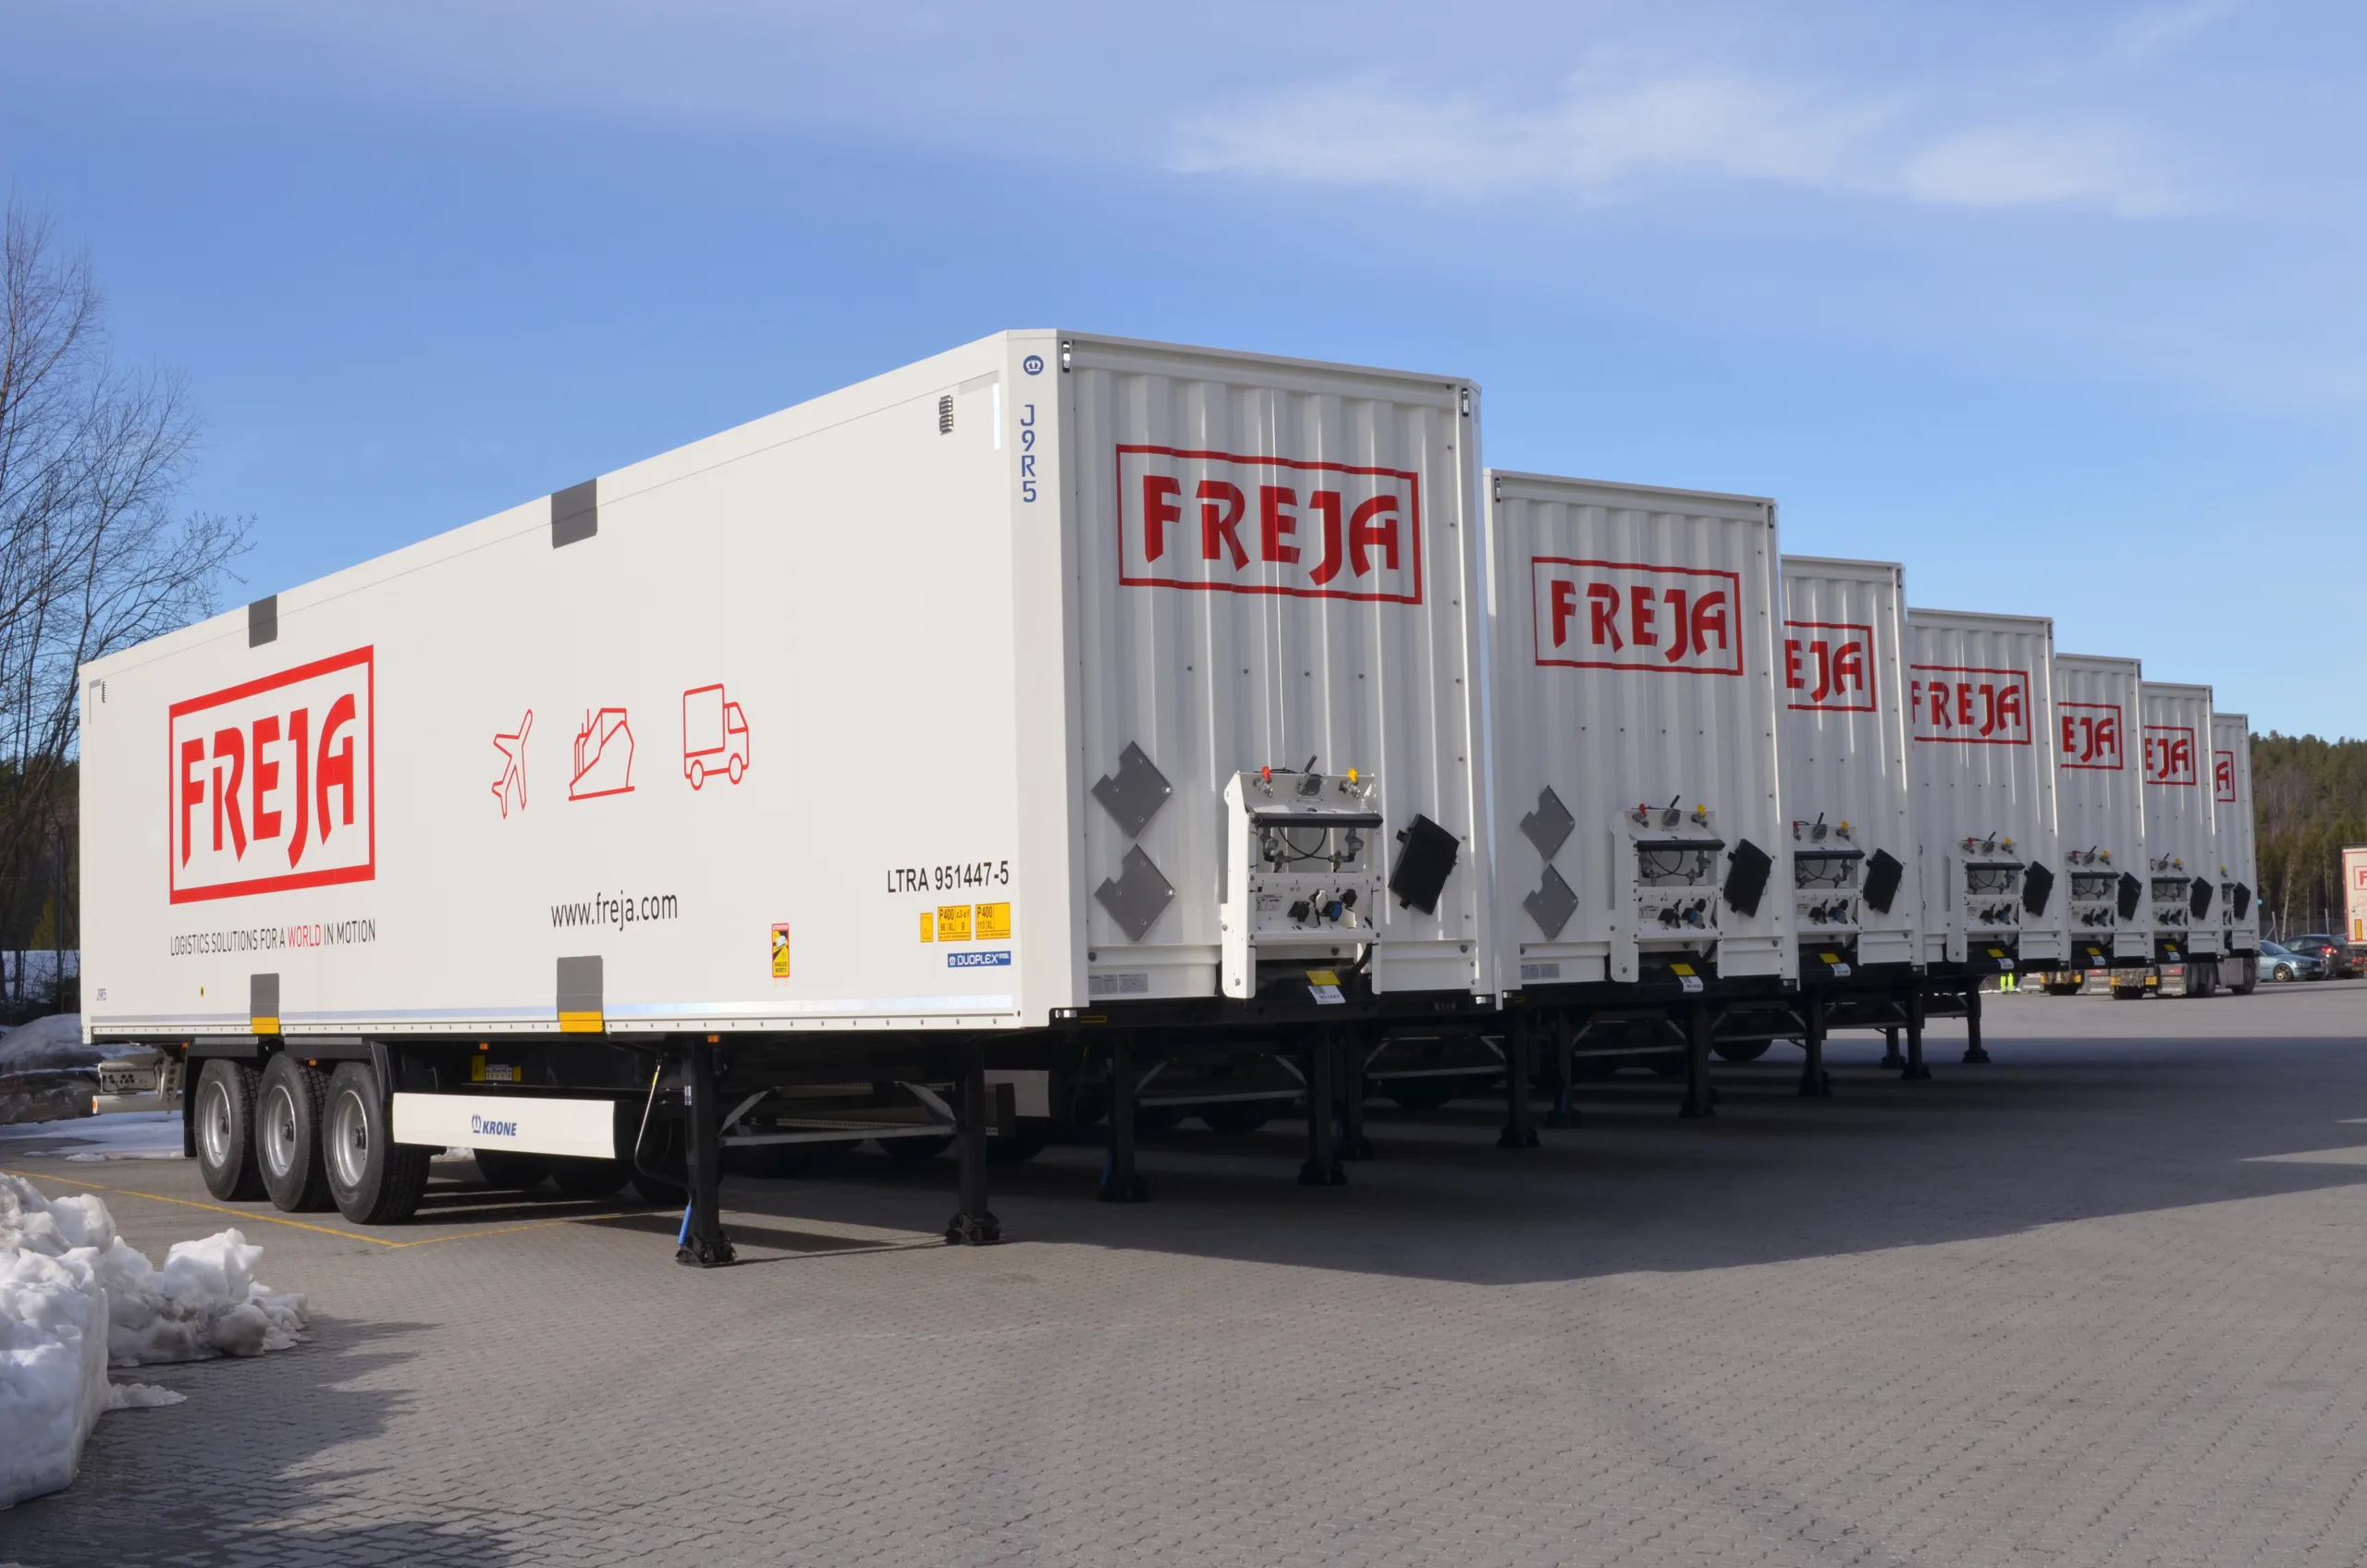 Some of the new box trailers ready for use.